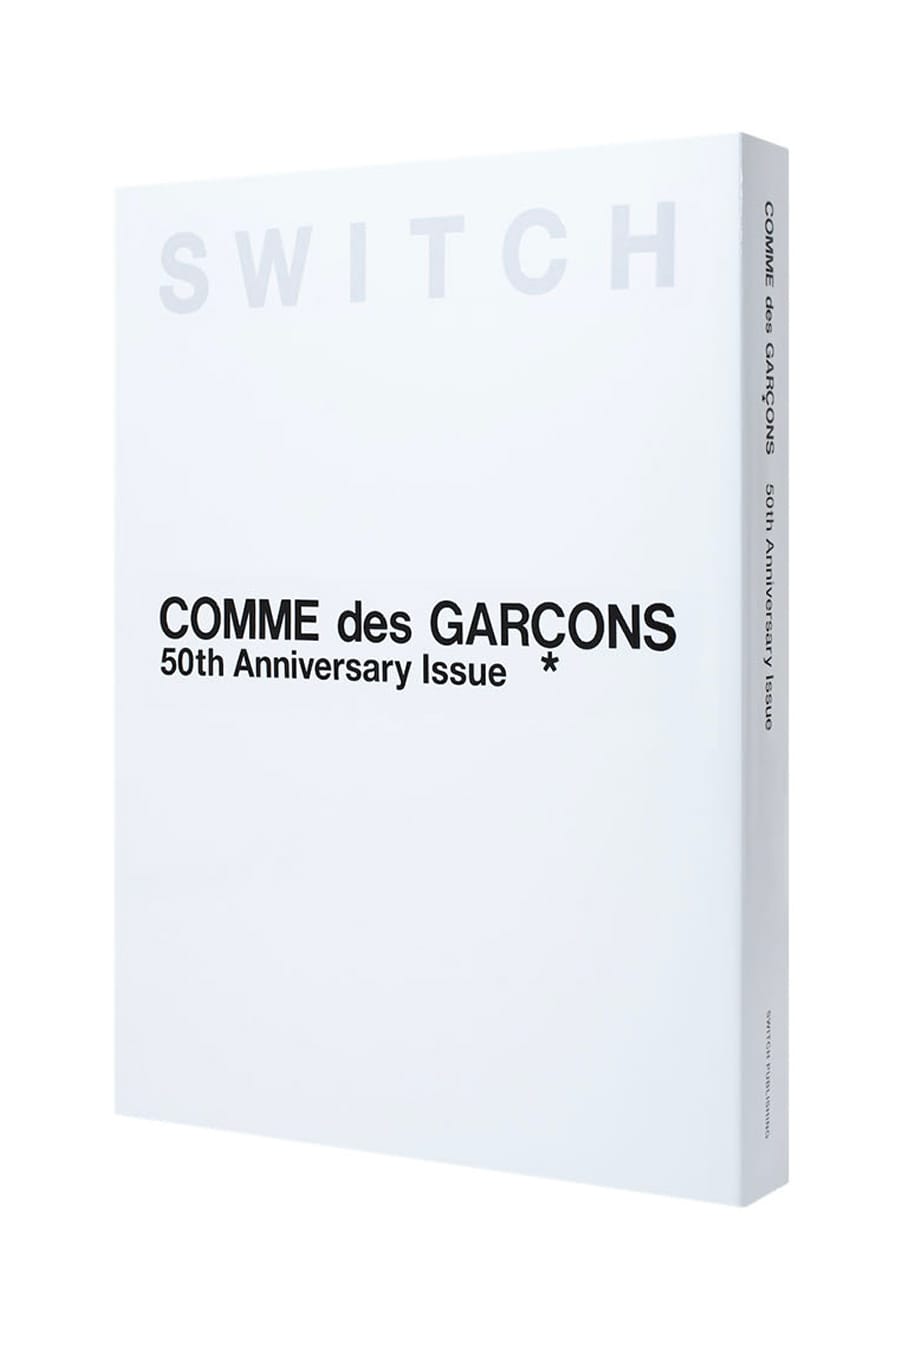 COMME des GARÇONS 50th Anniversary by Switch | Hypebeast